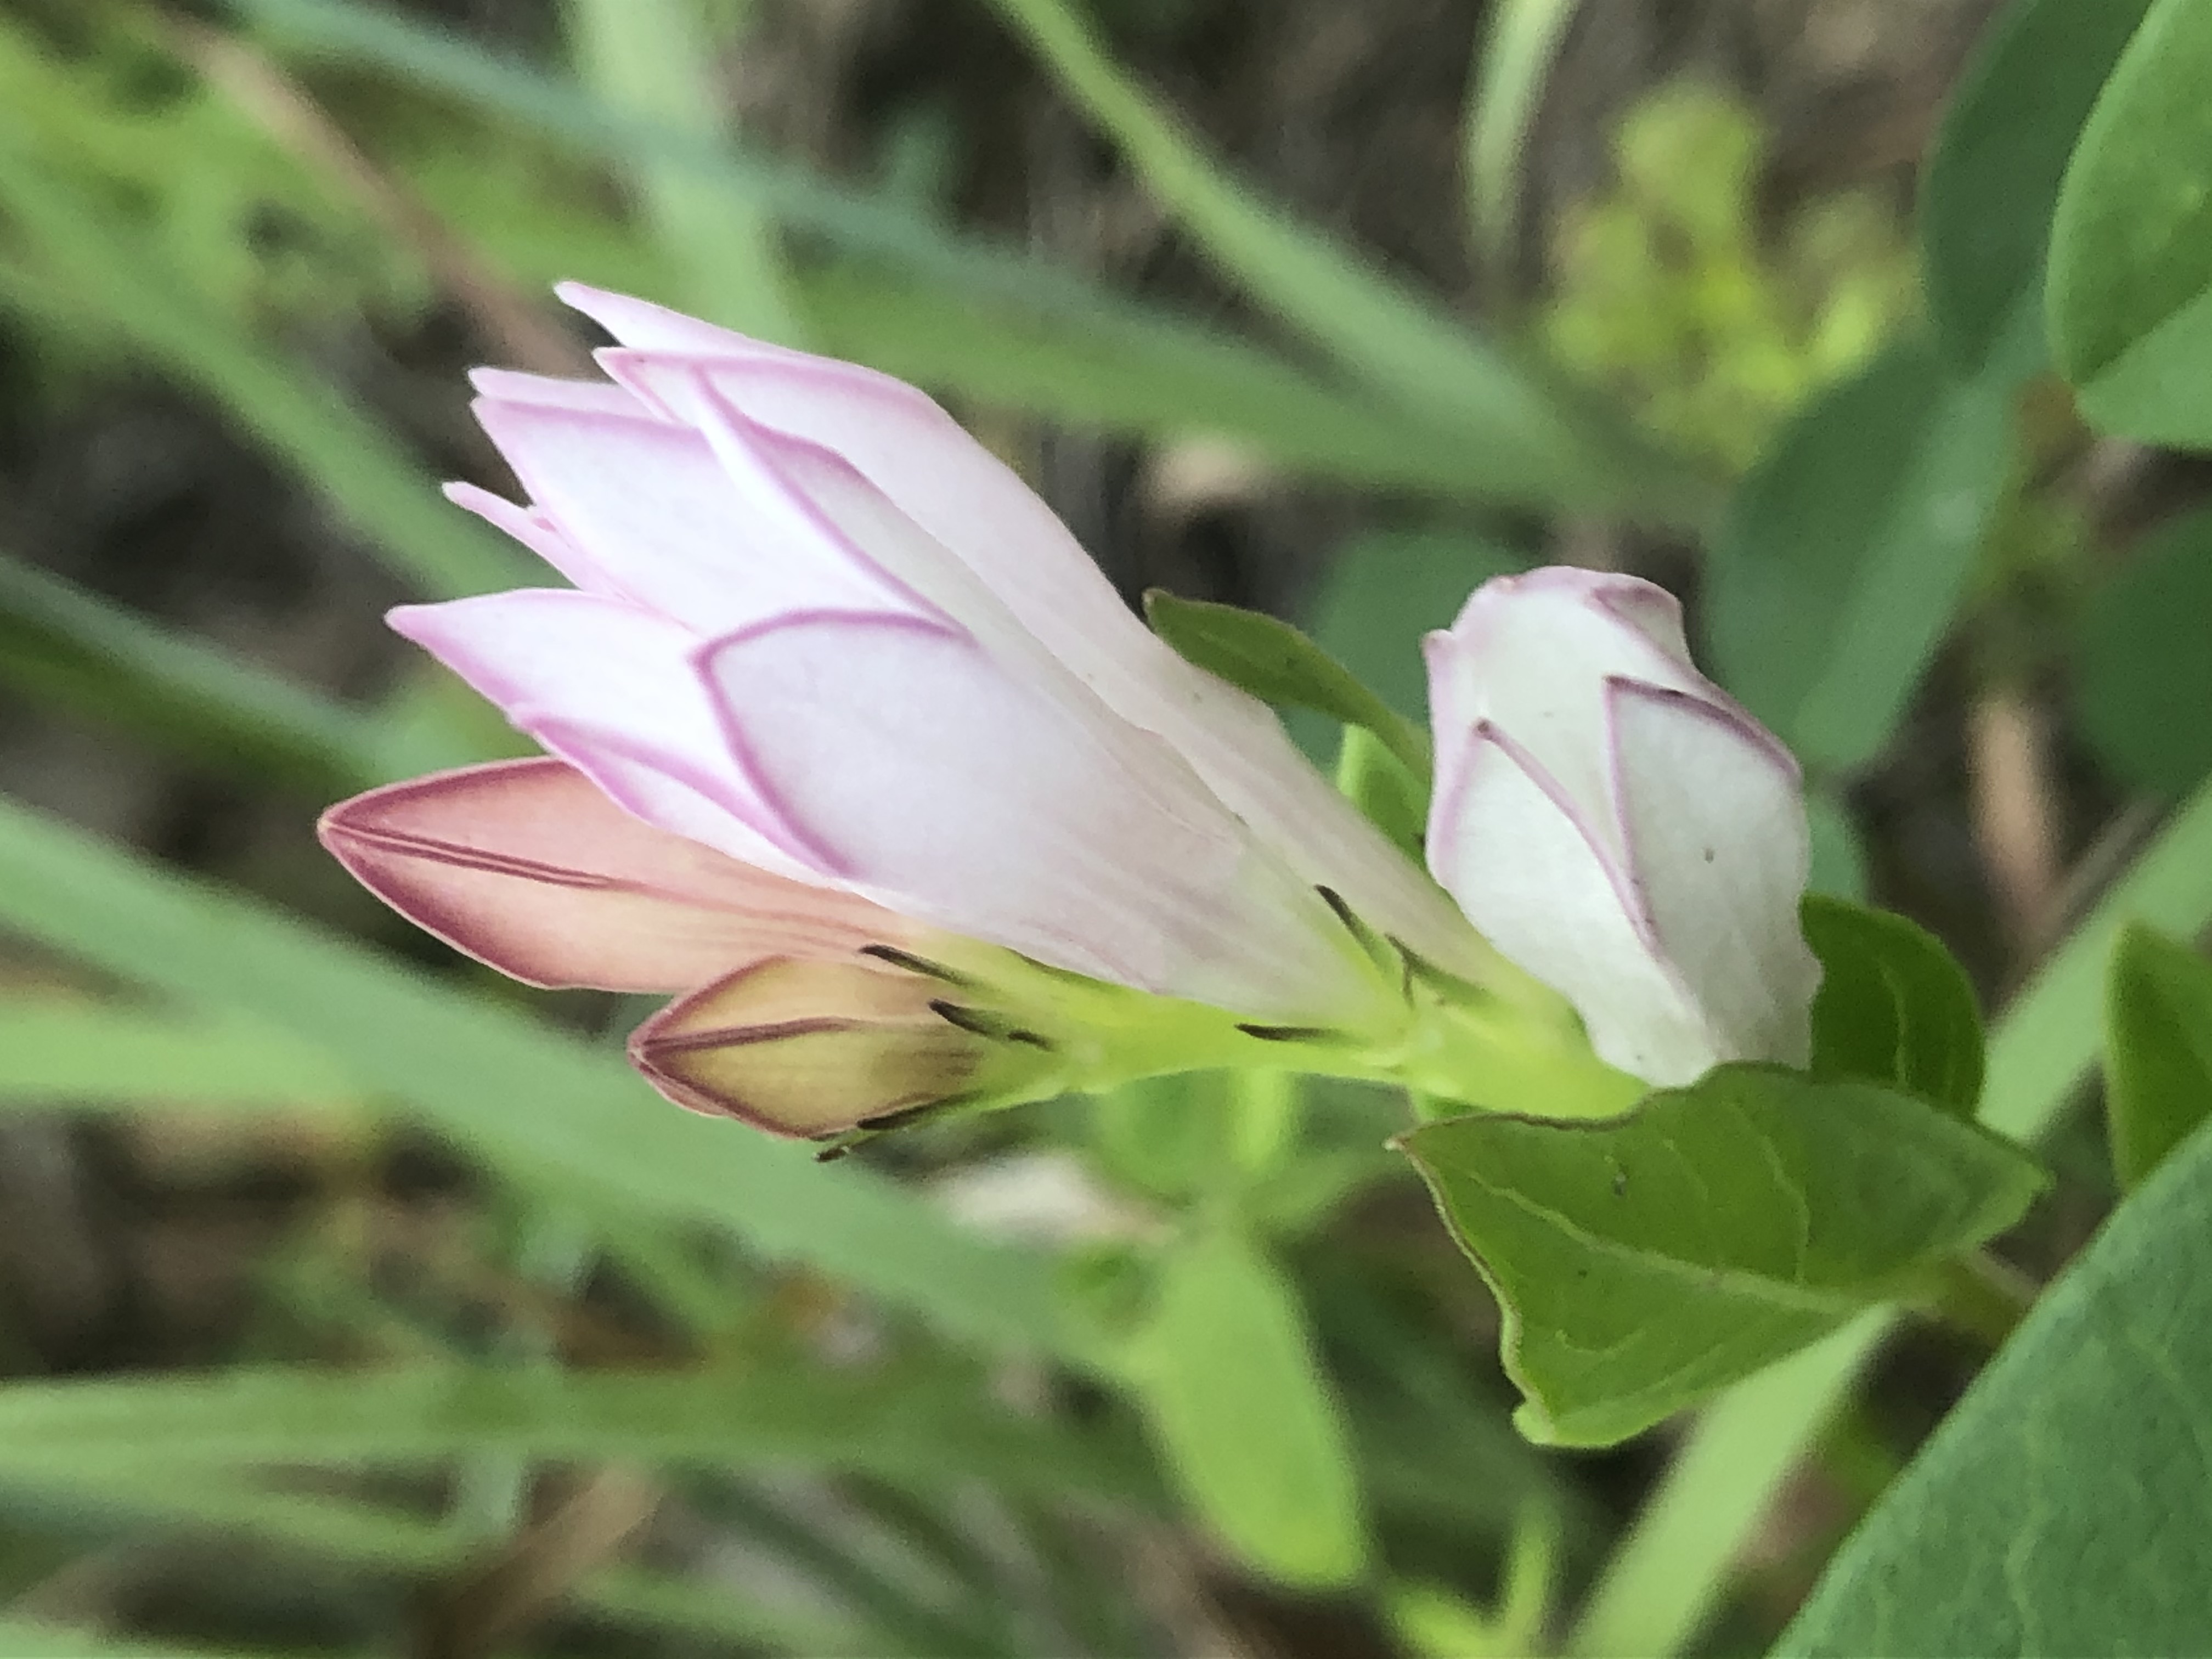 A pink flower opening